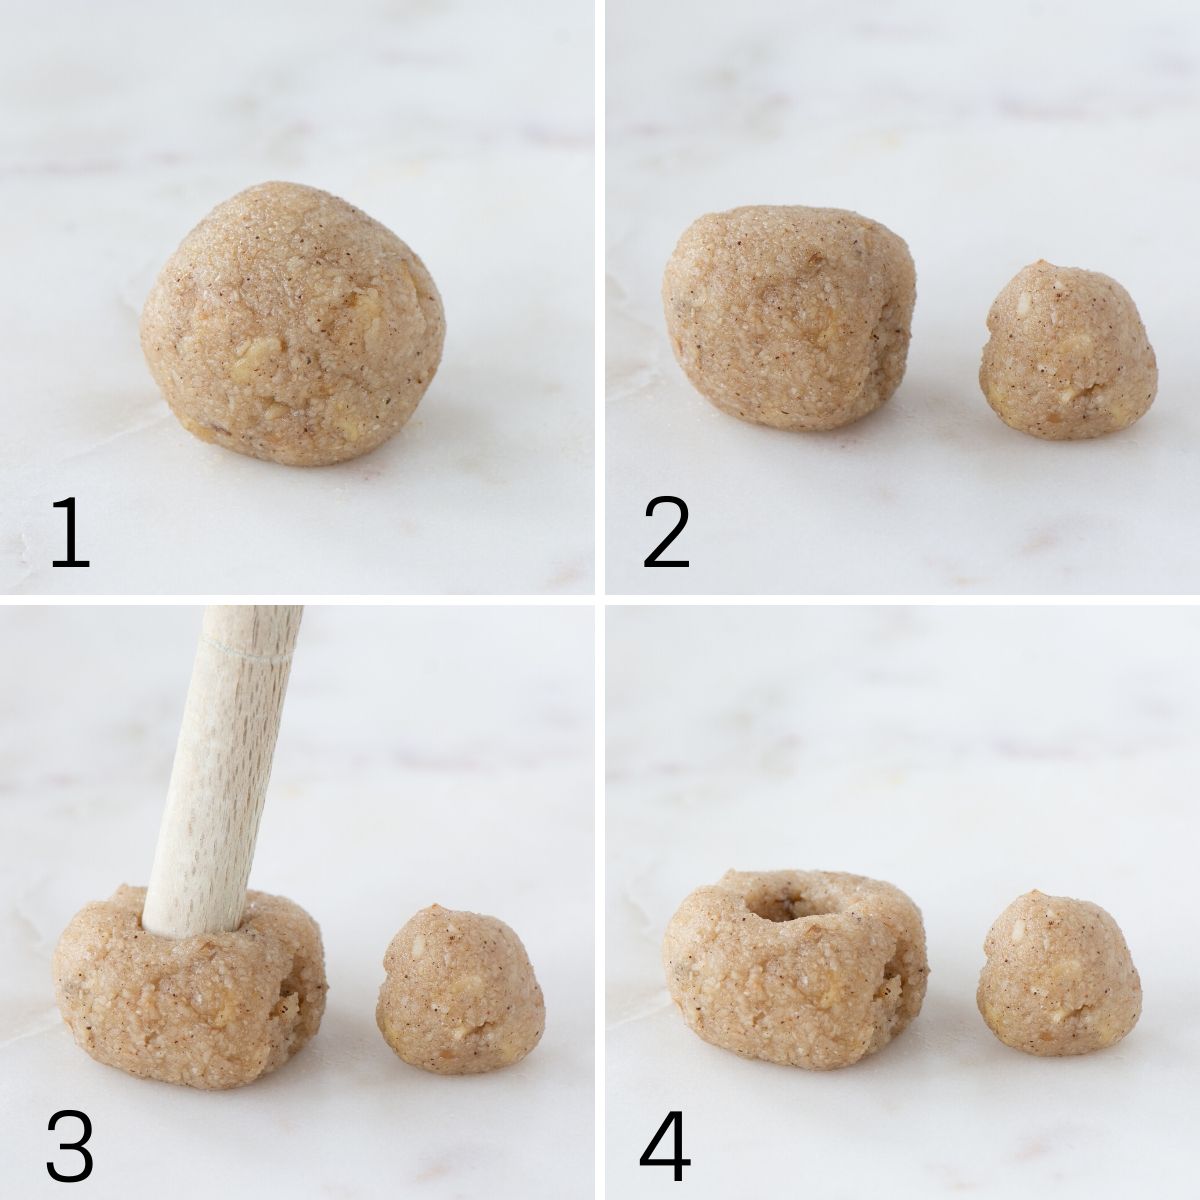 Step-by-step images showing how to add the hidden mincemeat centre.  1) A ball of spiced amaretti biscuit dough.
2) The dough is split into two.
3) The end of a wooden spoon being used to poke a hole in the middle of open ball of dough.
4) The amaretti biscuit dough after the hole has been made.